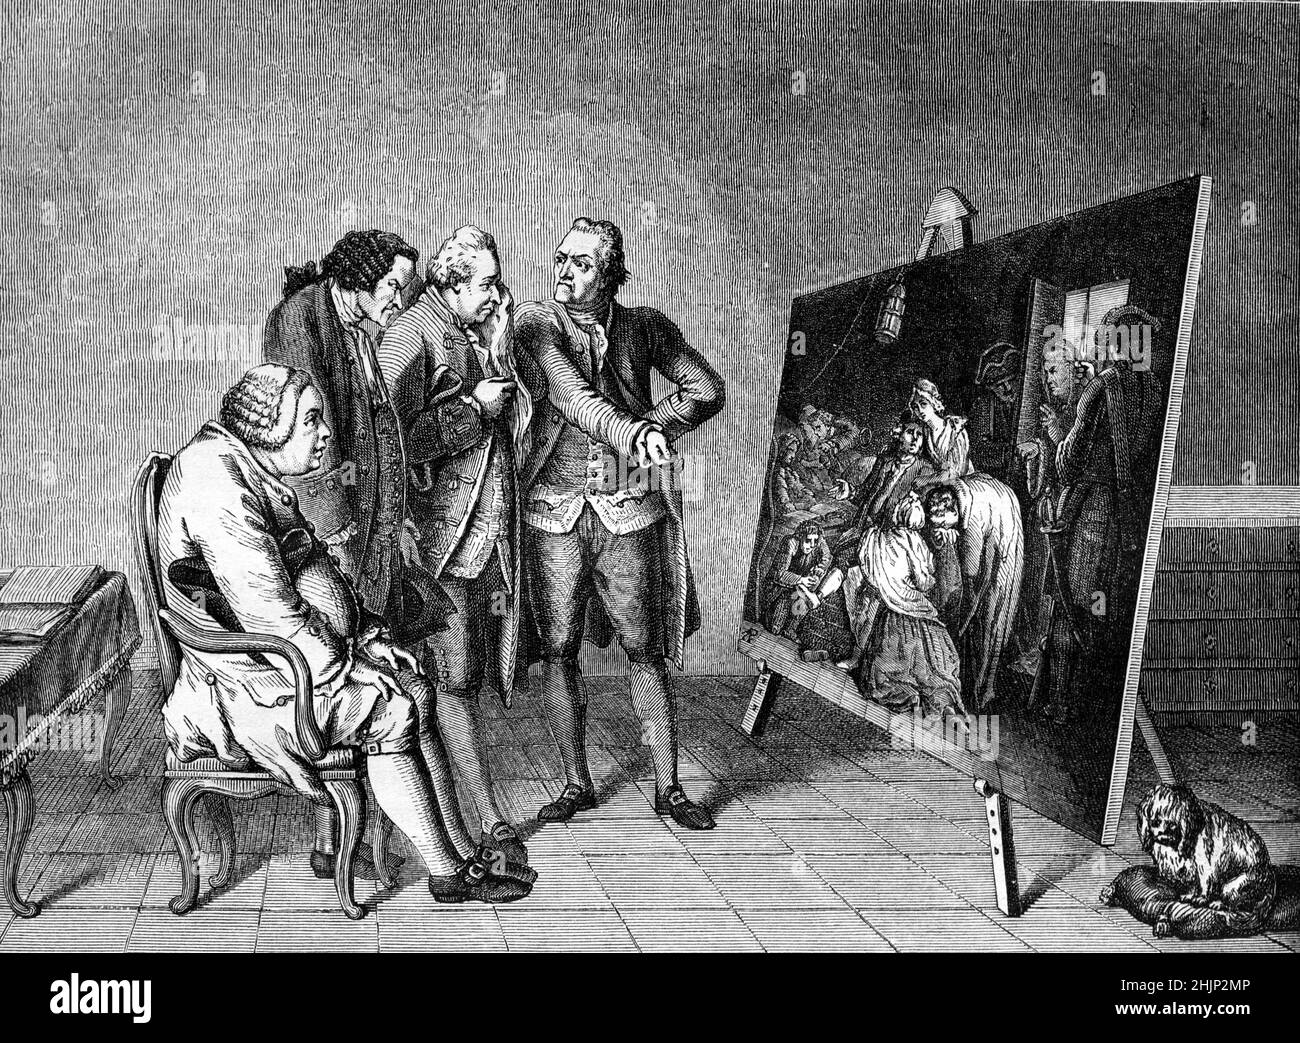 Engraving of Painting The Four Temperaments, Phlegmatic, Melancholic, Sanguine & Choloric Personality Types, based on Four Temperament Theory, by German Painter & Printmaker Daniel Niklaus Chodowiecki (1726-1801) Stock Photo